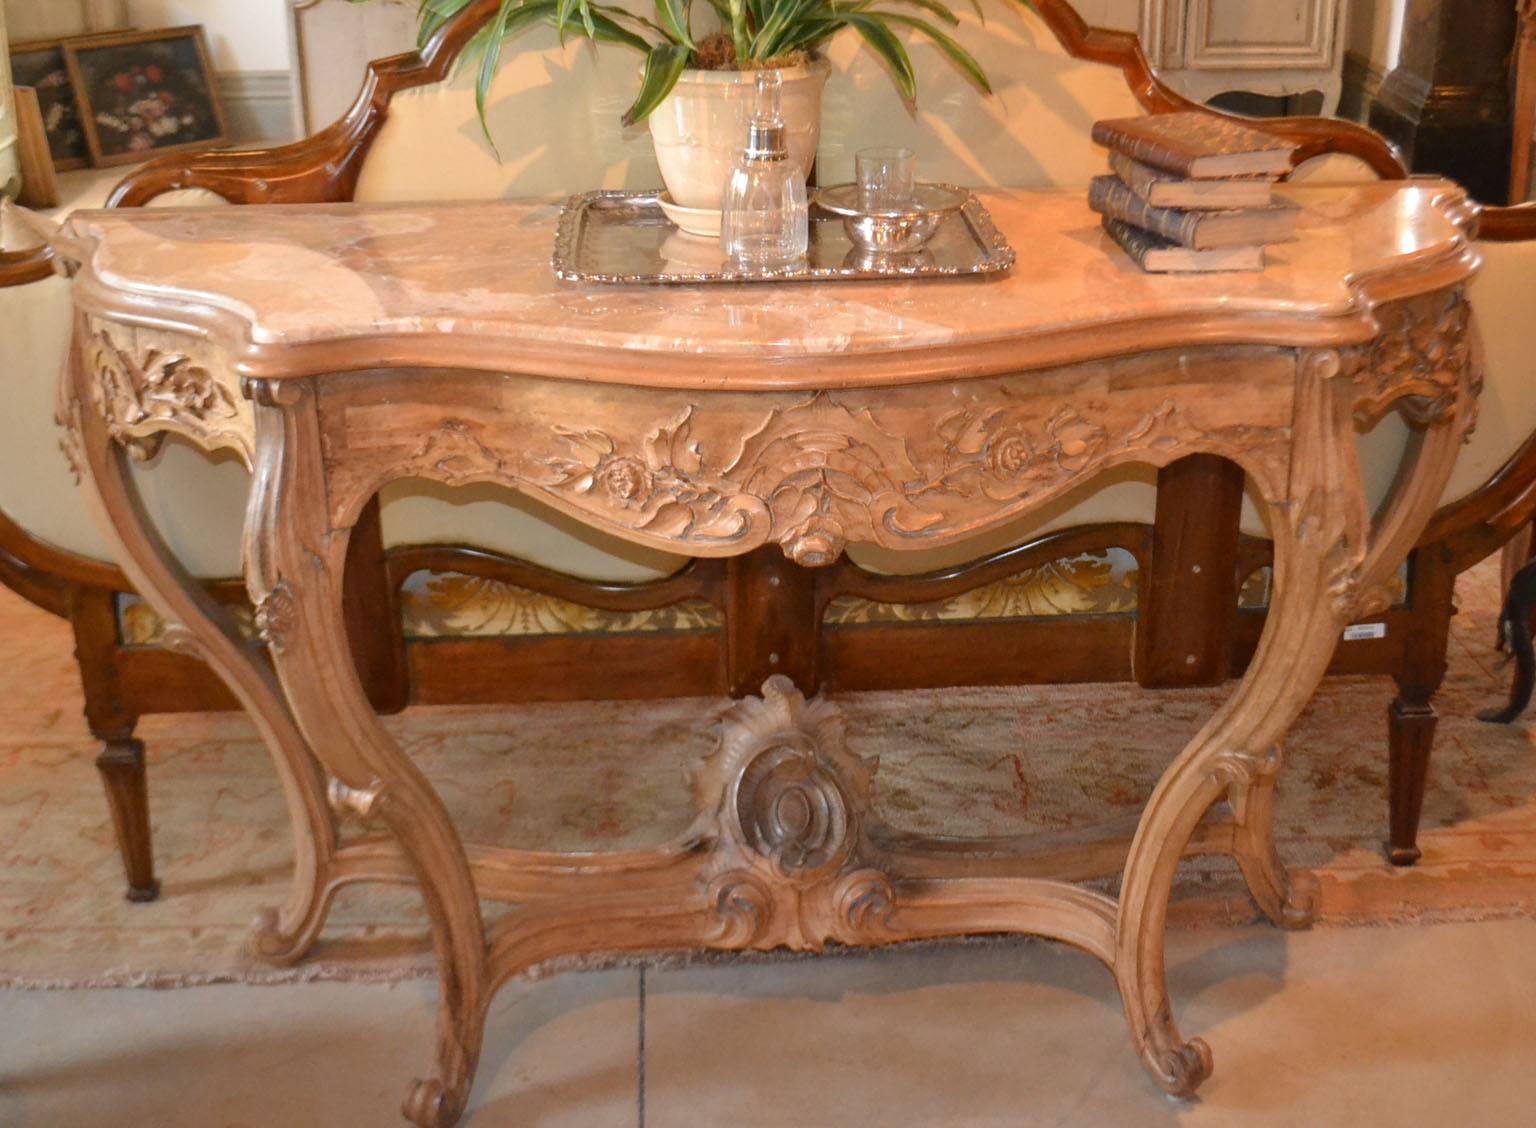 19th century Italian, fruitwood console table with petra dura marble top.